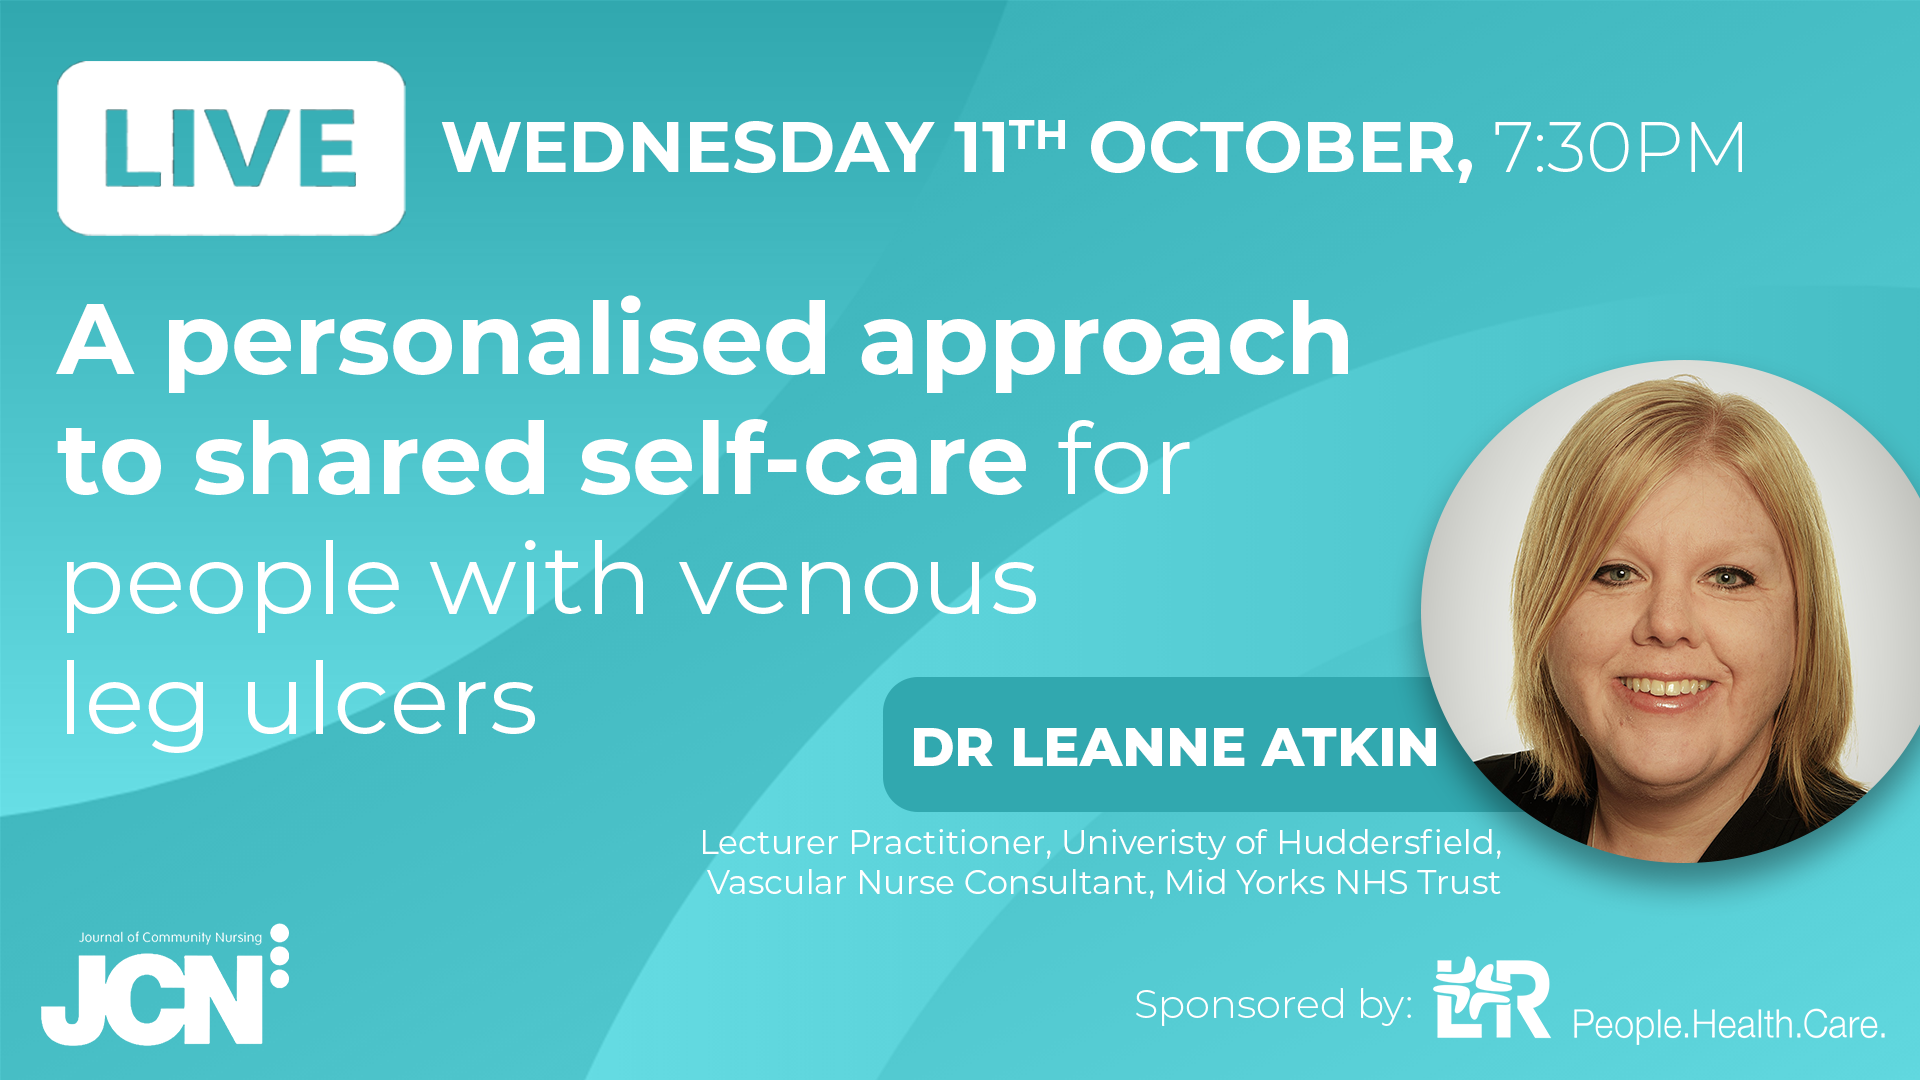 Facebook Live: A personalised approach to shared self-care for people with venous leg ulcers